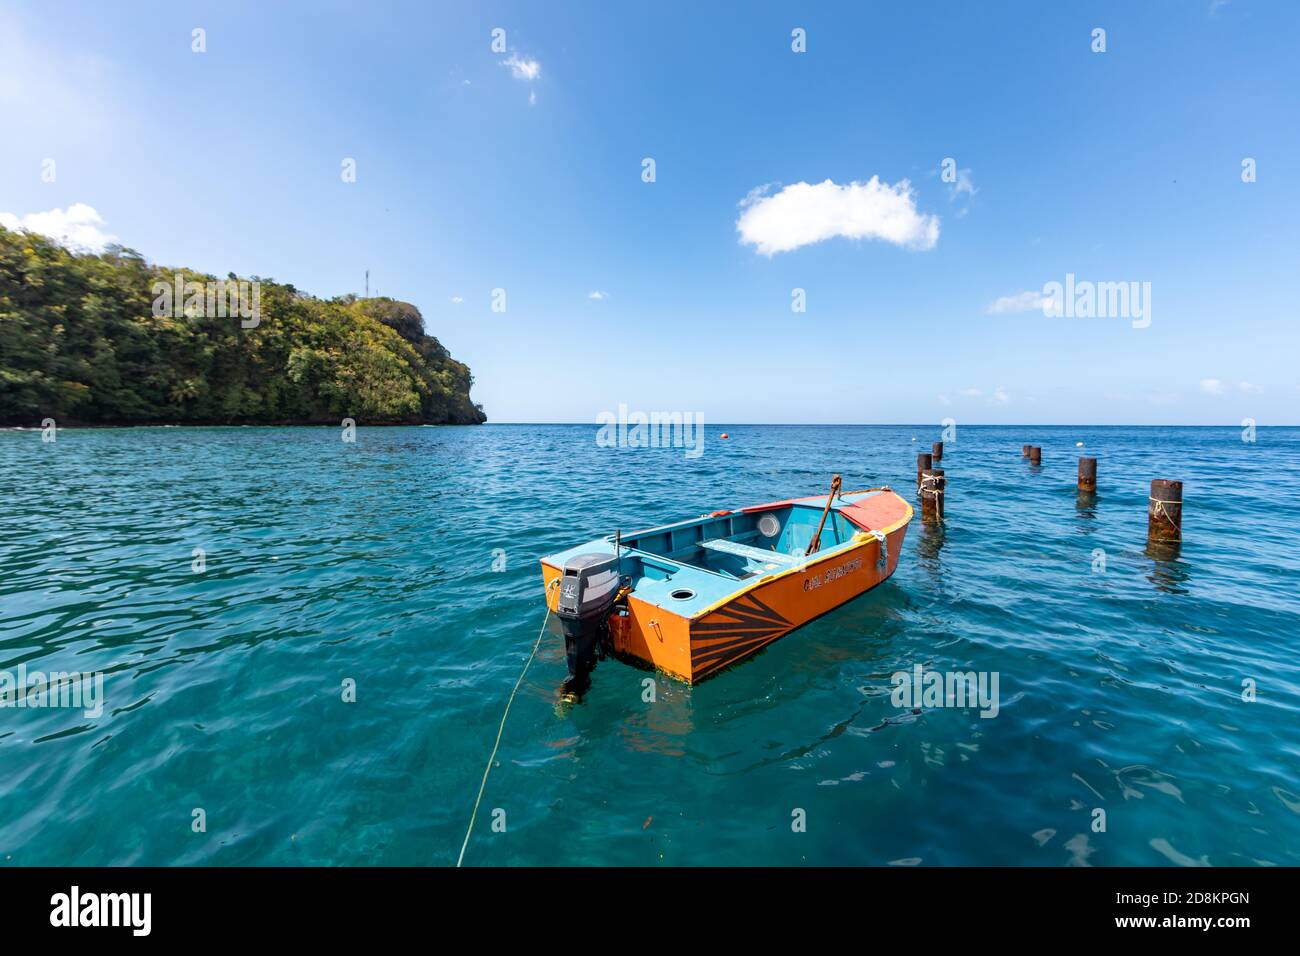 10 JAN 2020 - Saint Vincent, Saint Vincent and the Grenadines - Bark in Wallilabou bay Stock Photo